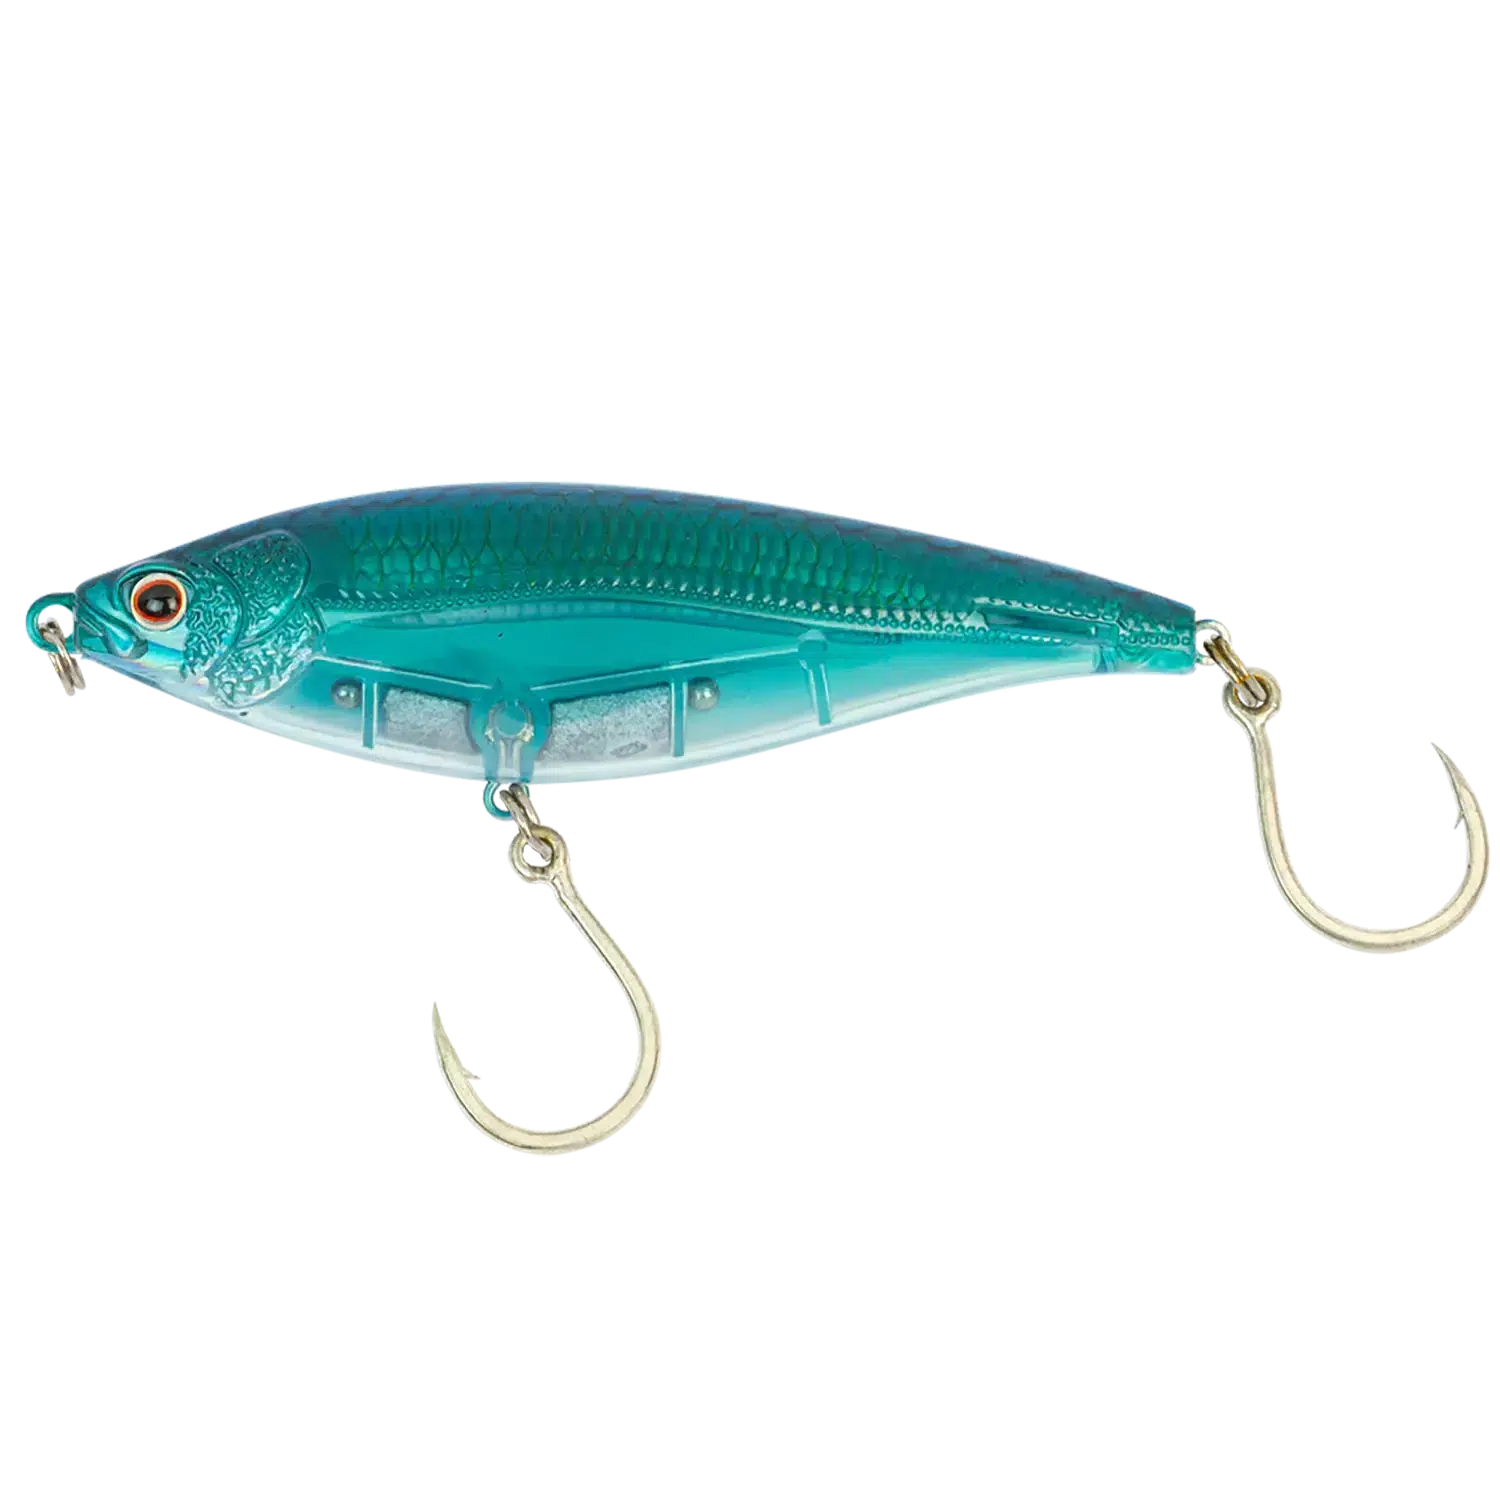 Nomad Madscad Auto Tune Slow Sink 90-Lure - Poppers, Stickbaits & Pencils-Nomad-Candy Pilchard-Fishing Station